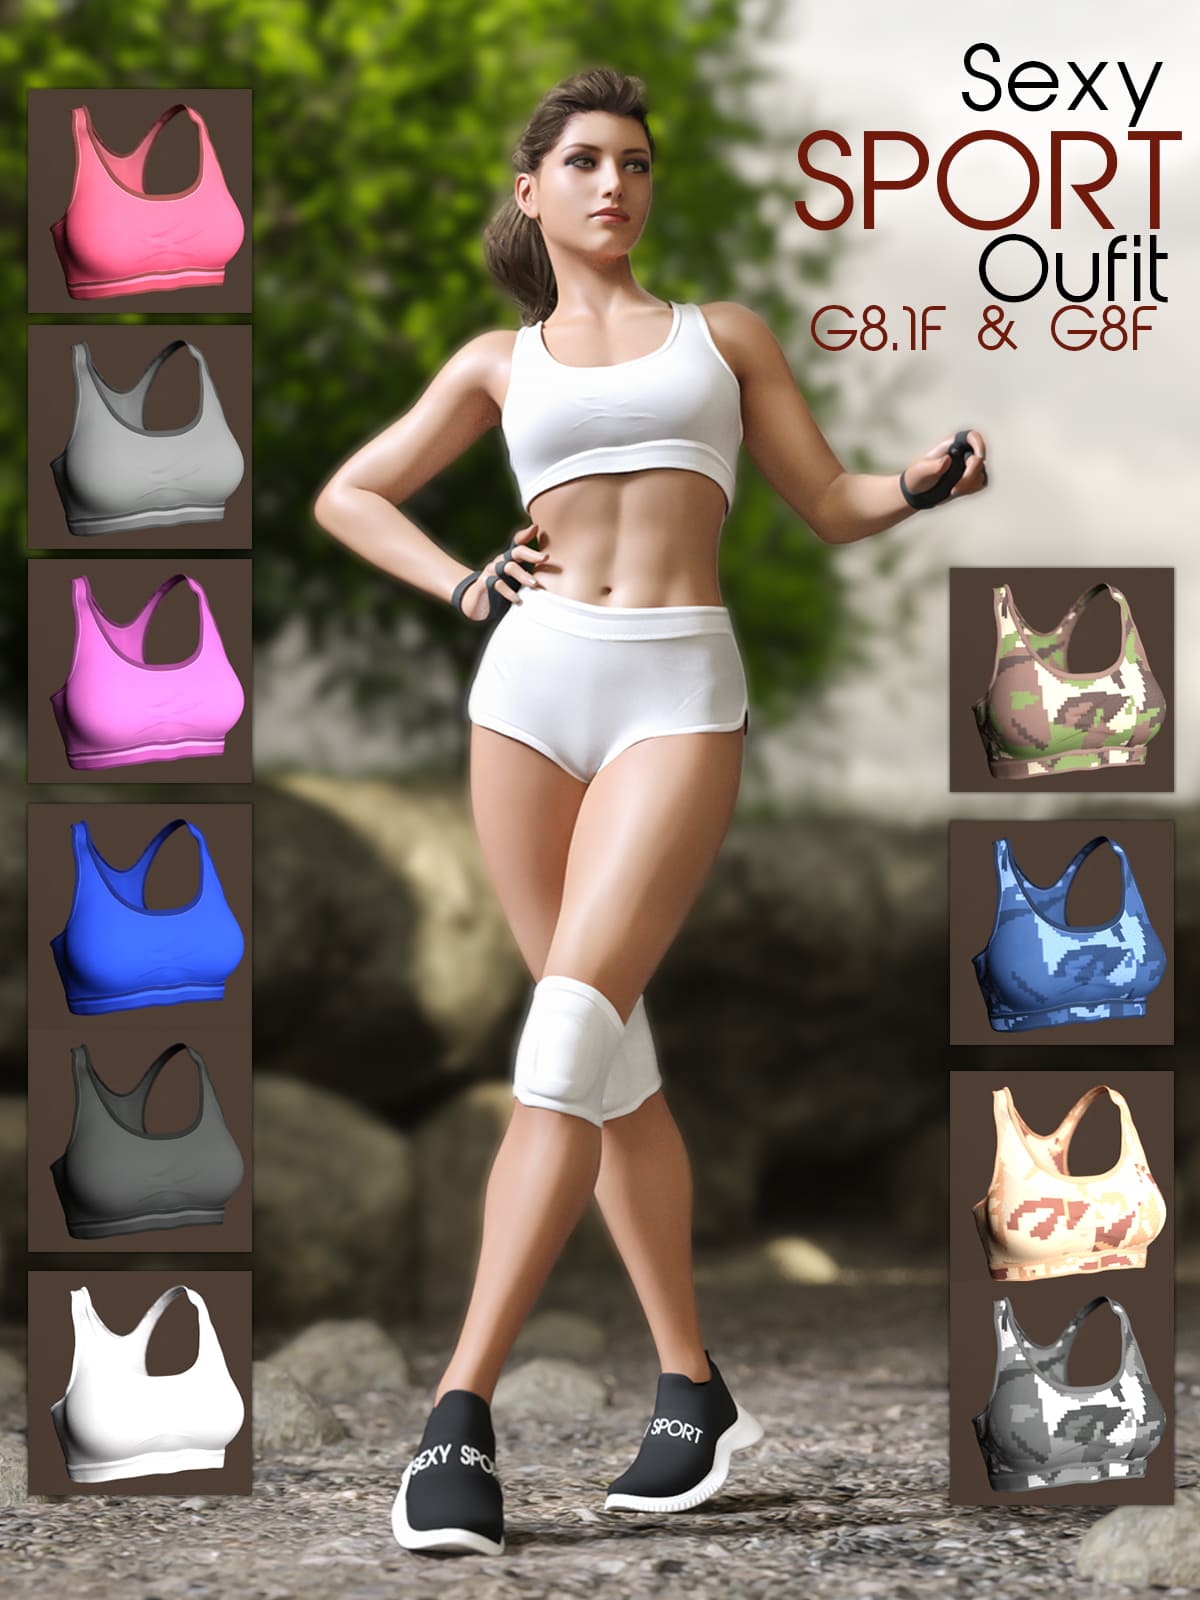 Sexy Sport Outfit For g81f & g8f_DAZ3D下载站